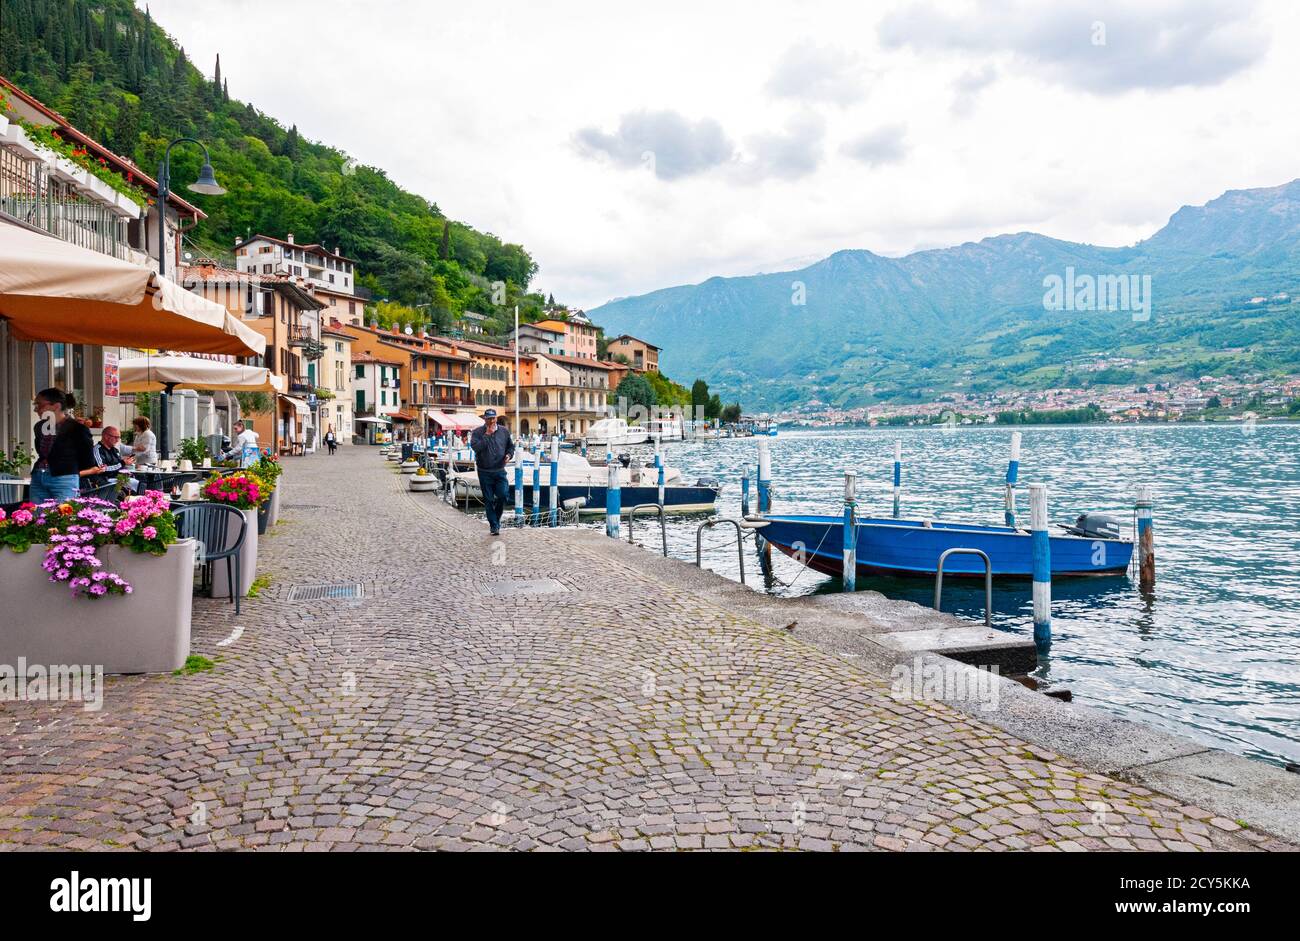 View of Lago d'Iseo and the town of Peschiera Maraglio on Monte Isola, Italy Stock Photo